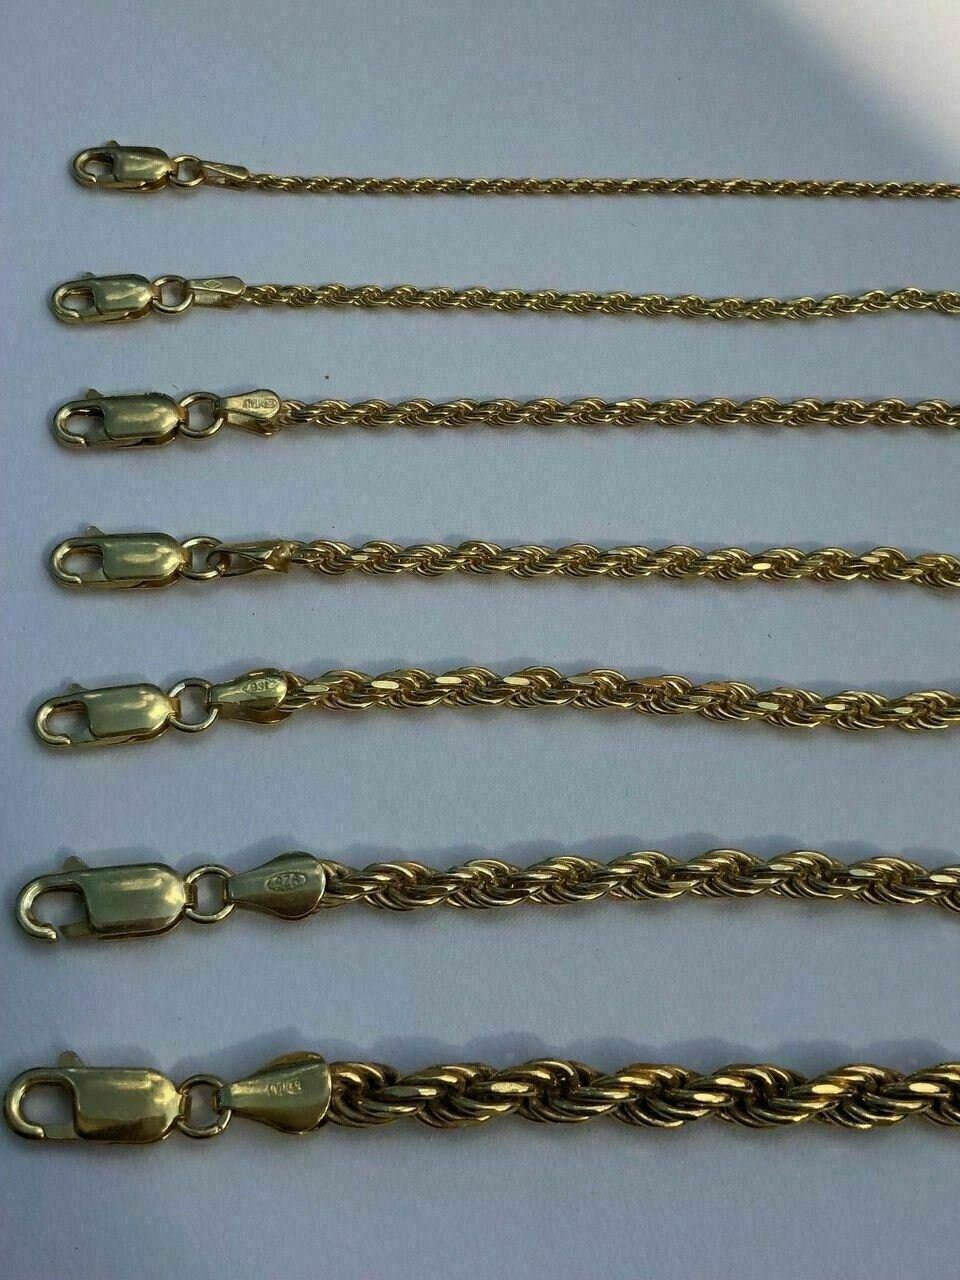 Men's Women's 14K Sterling Silver 925 Plated Thin Short Rope Chain